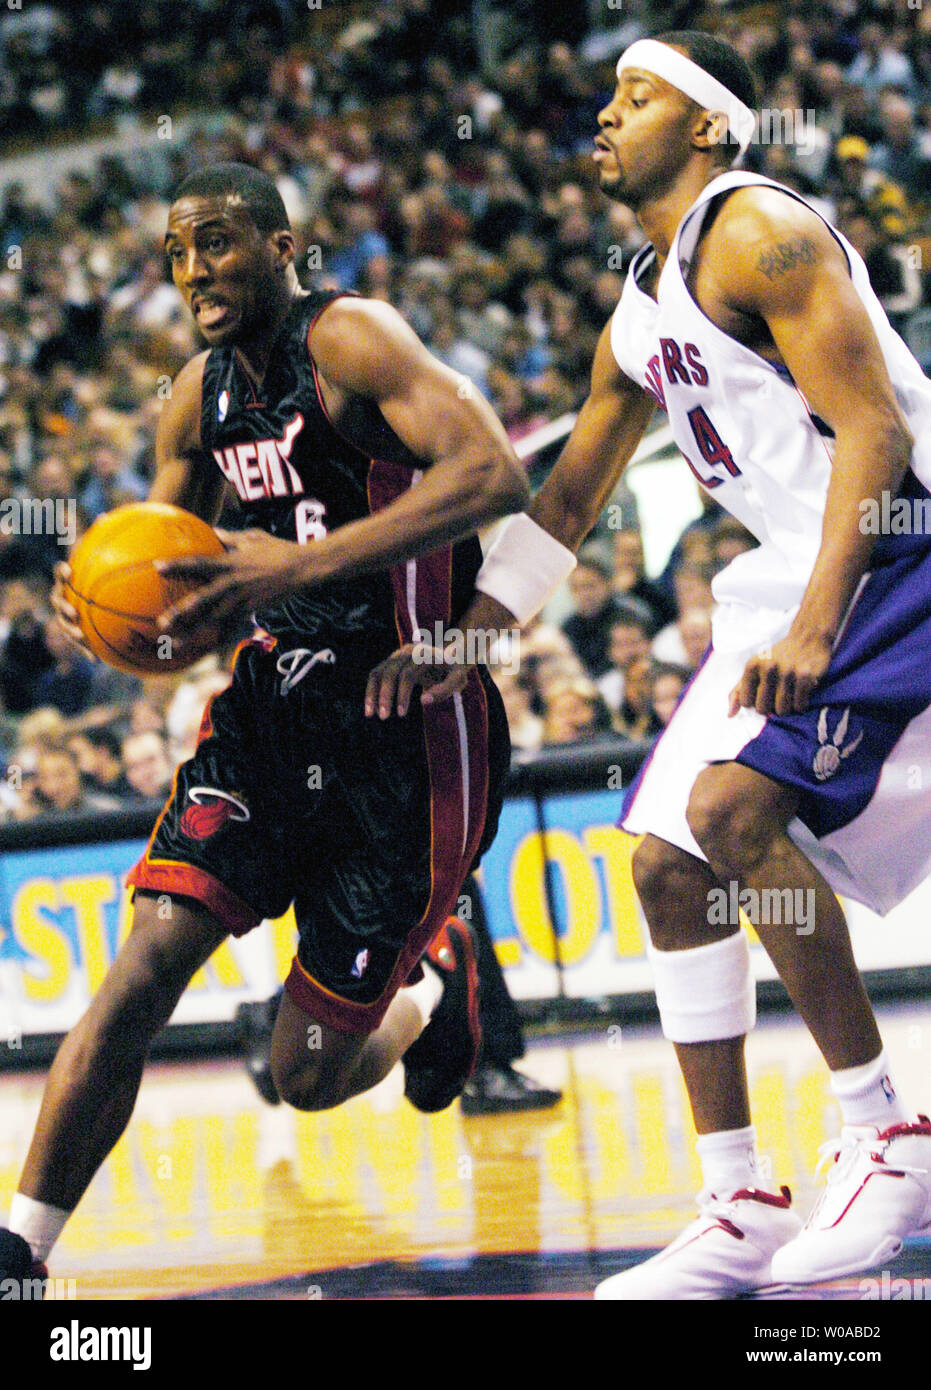 Toronto Raptors' Morris Peterson guards Atlanta Hawks' Joe Johnson in the  first quarter as the Raptors host the Hawks at the Air Canada Center on  December 28, 2005 in Toronto, Canada. Peterson